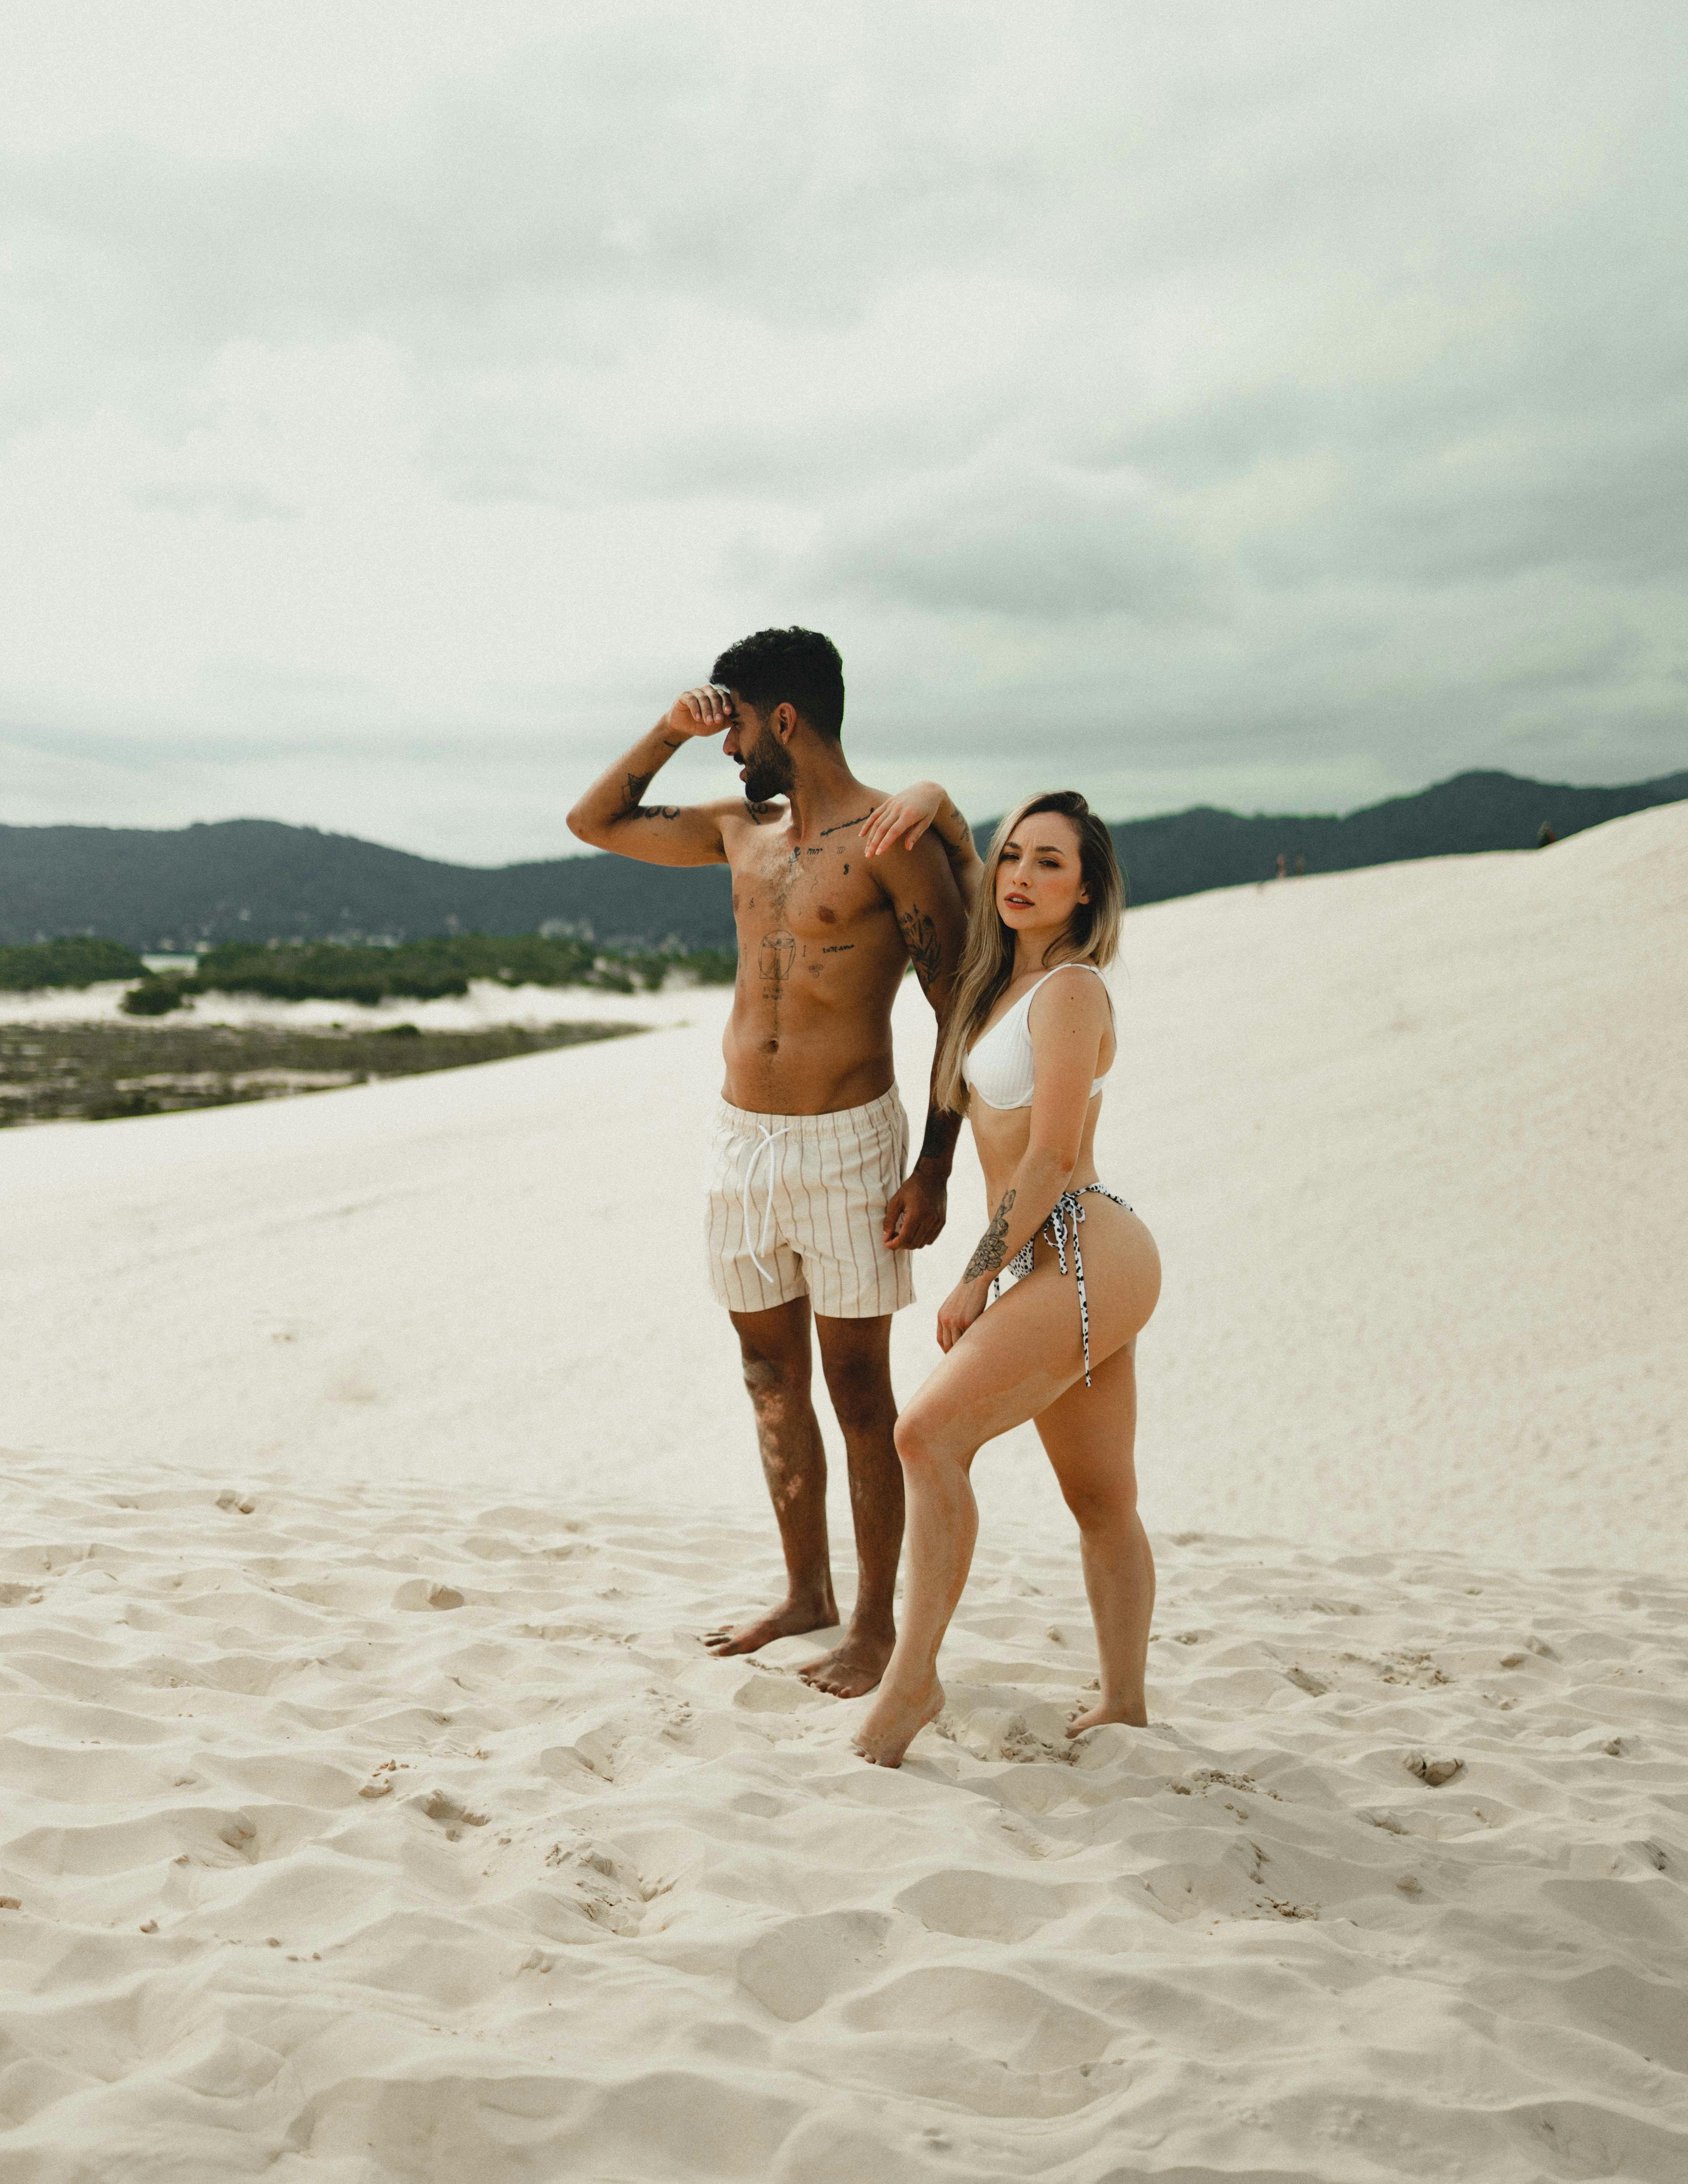 Beach photo poses for couples || couple beach poses for Photoshoot 2022 -  YouTube